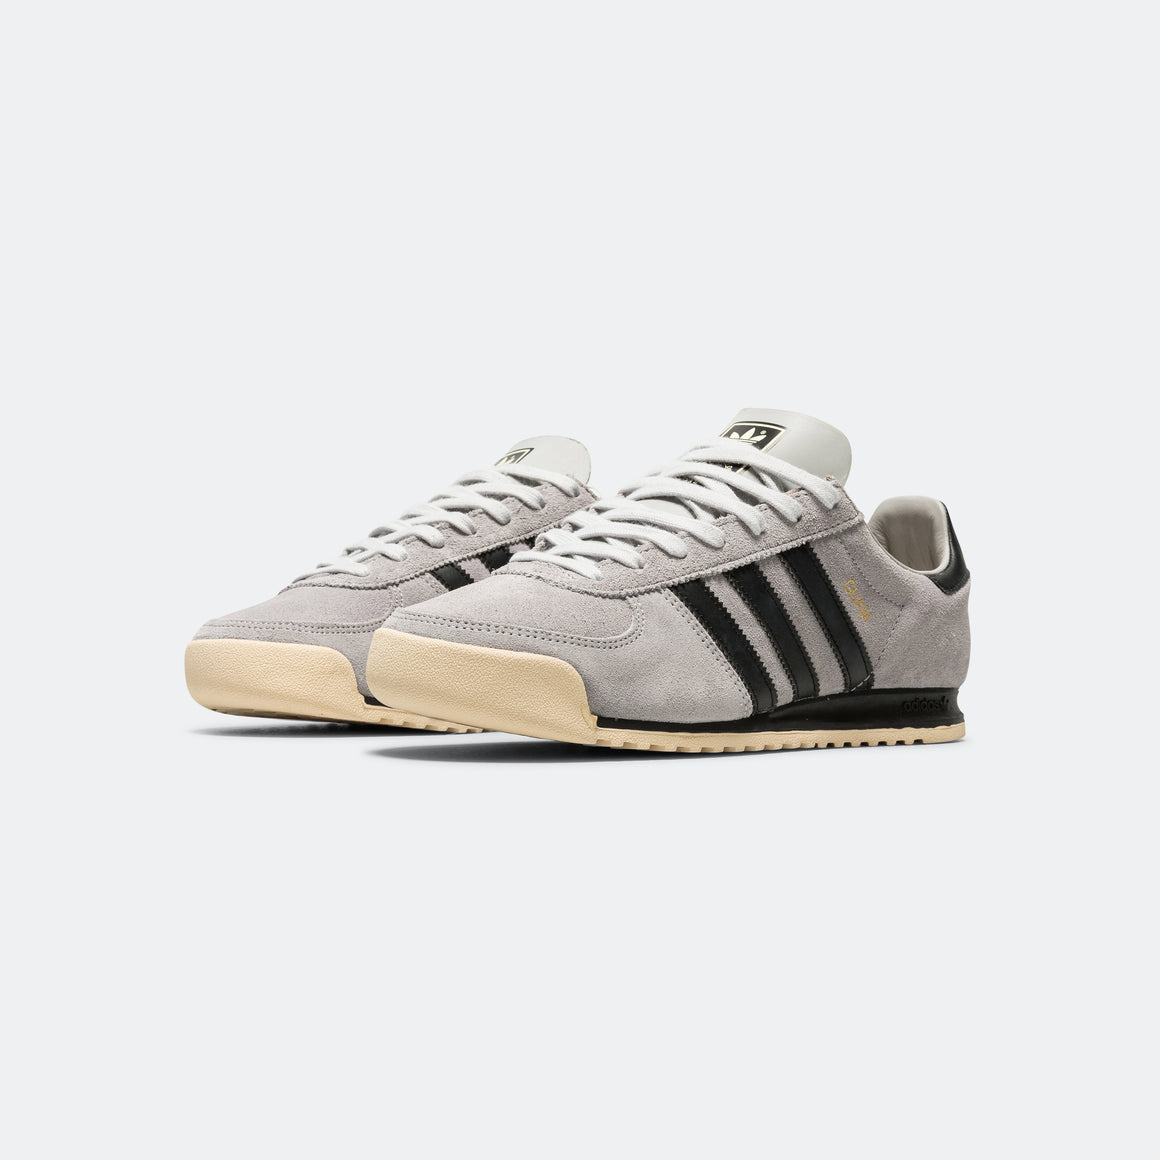 adidas - Guam - Light Onix/Core Black-Grey Two - UP THERE